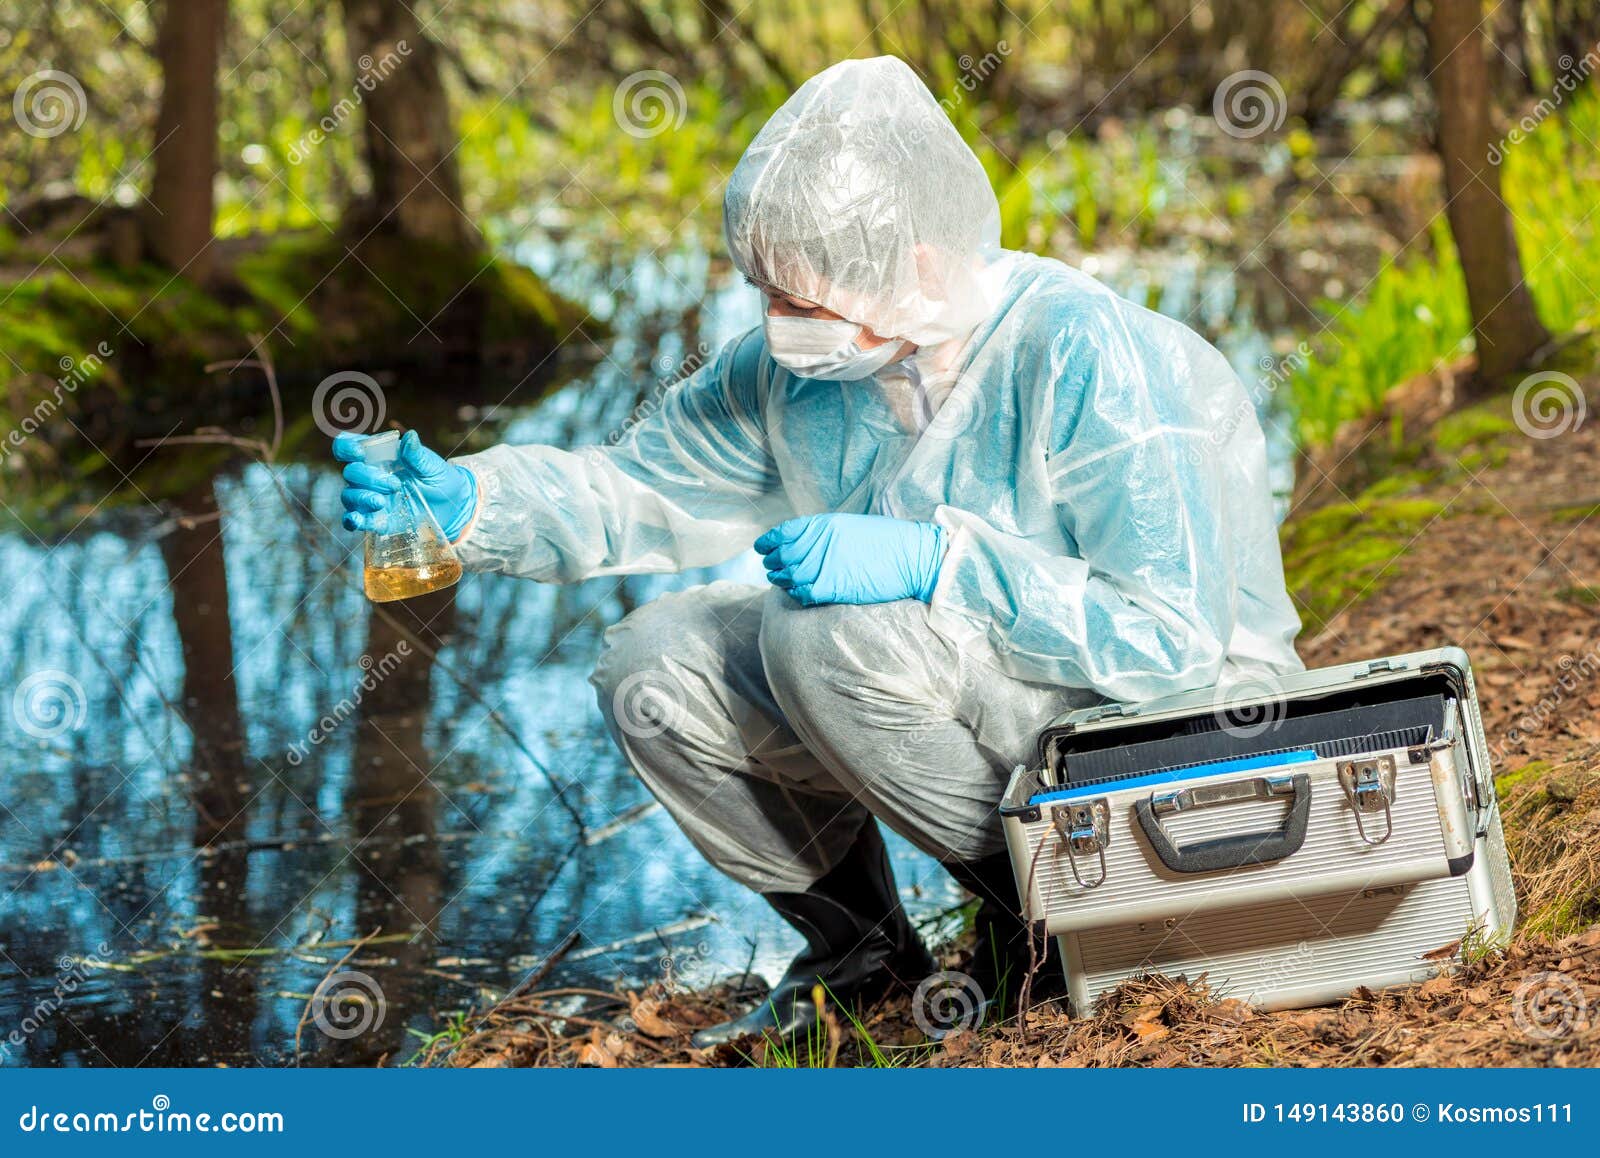 water sampling by an experienced ecologist